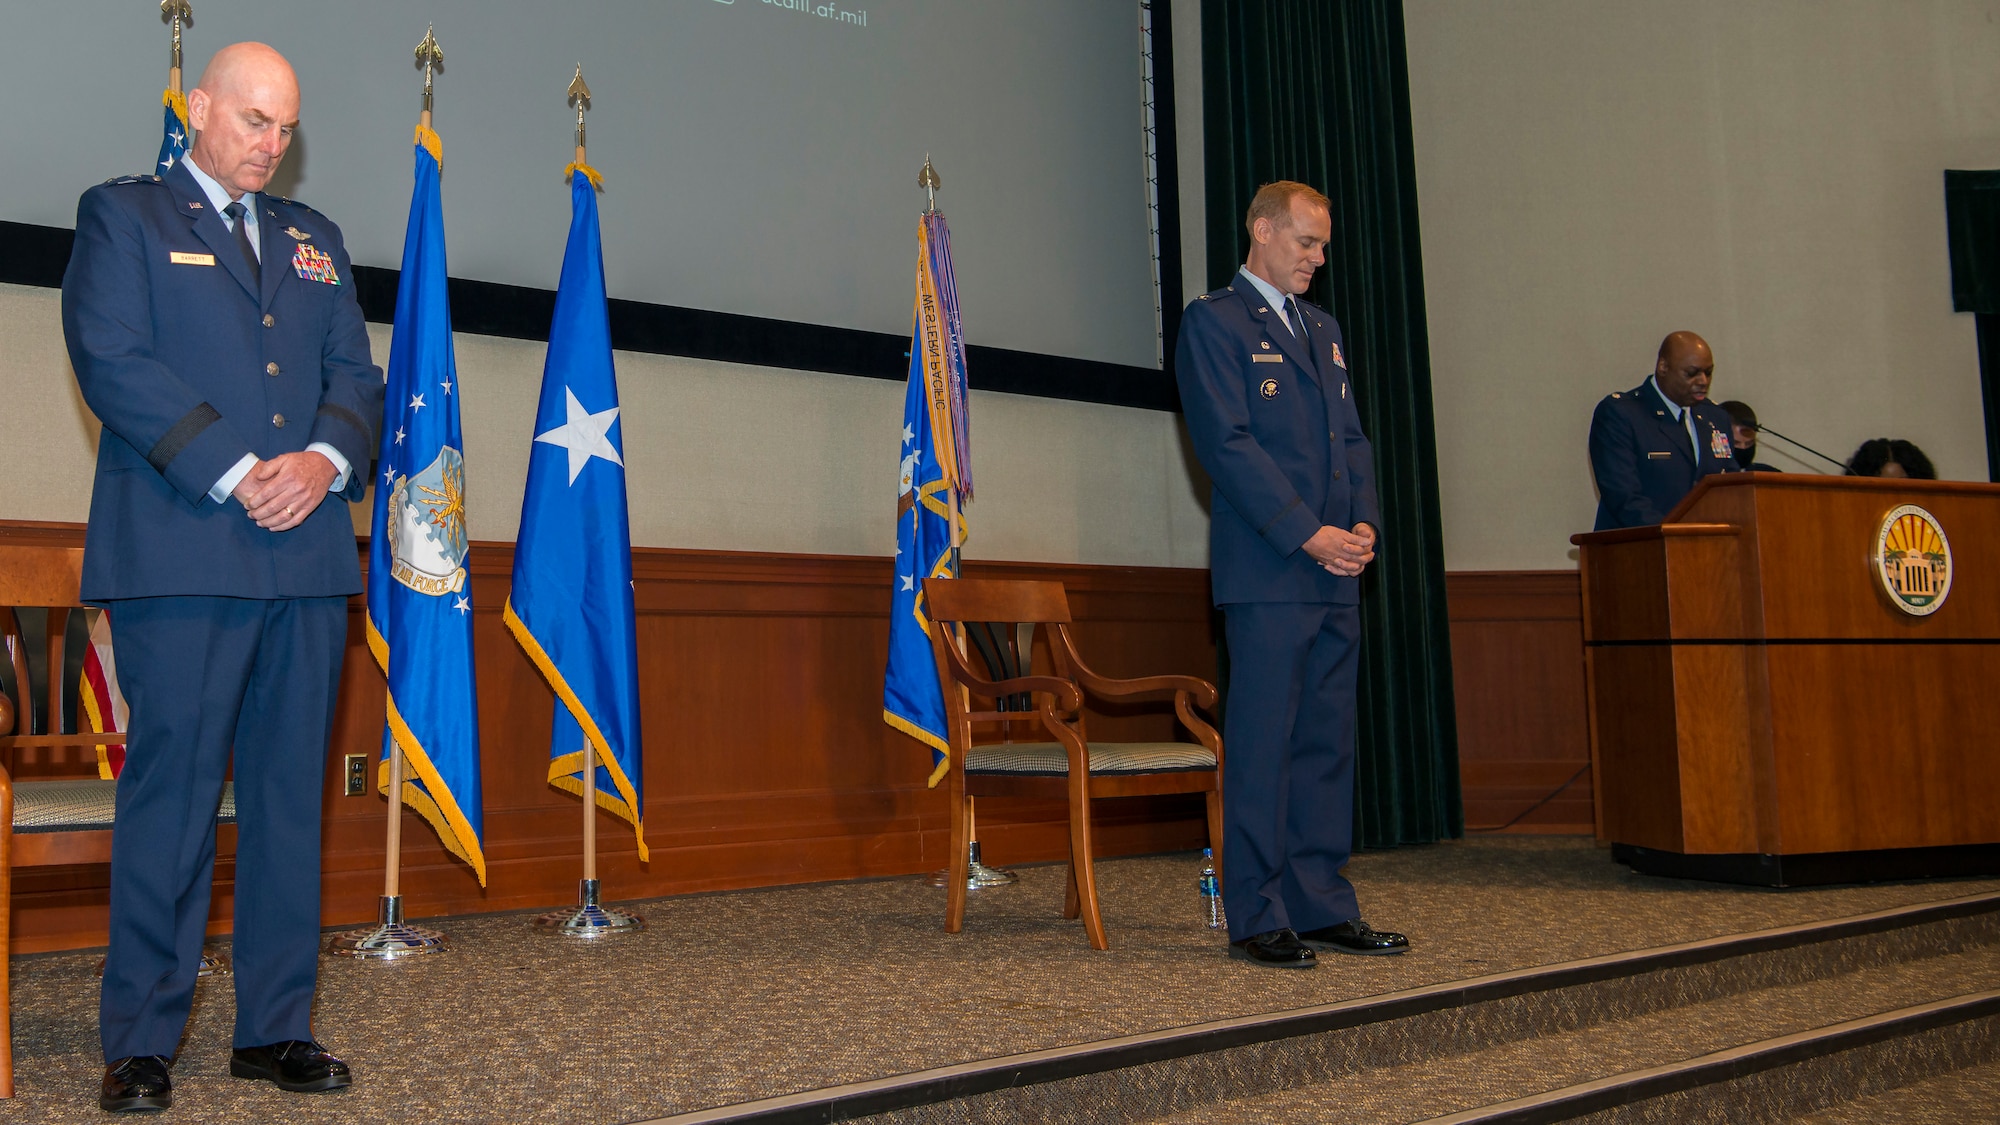 U.S. Air Force Maj. Gen. Sam Barrett, the 18th Air Force commander, and Col. Benjamin Jonsson, assuming 6th Air Refueling Wing (ARW) commander, bow their heads for an invocation by Lt. Col. Clyde Dyson, the 6 ARW chaplain, at MacDill Air Force Base, Fla., Aug. 4, 2020.